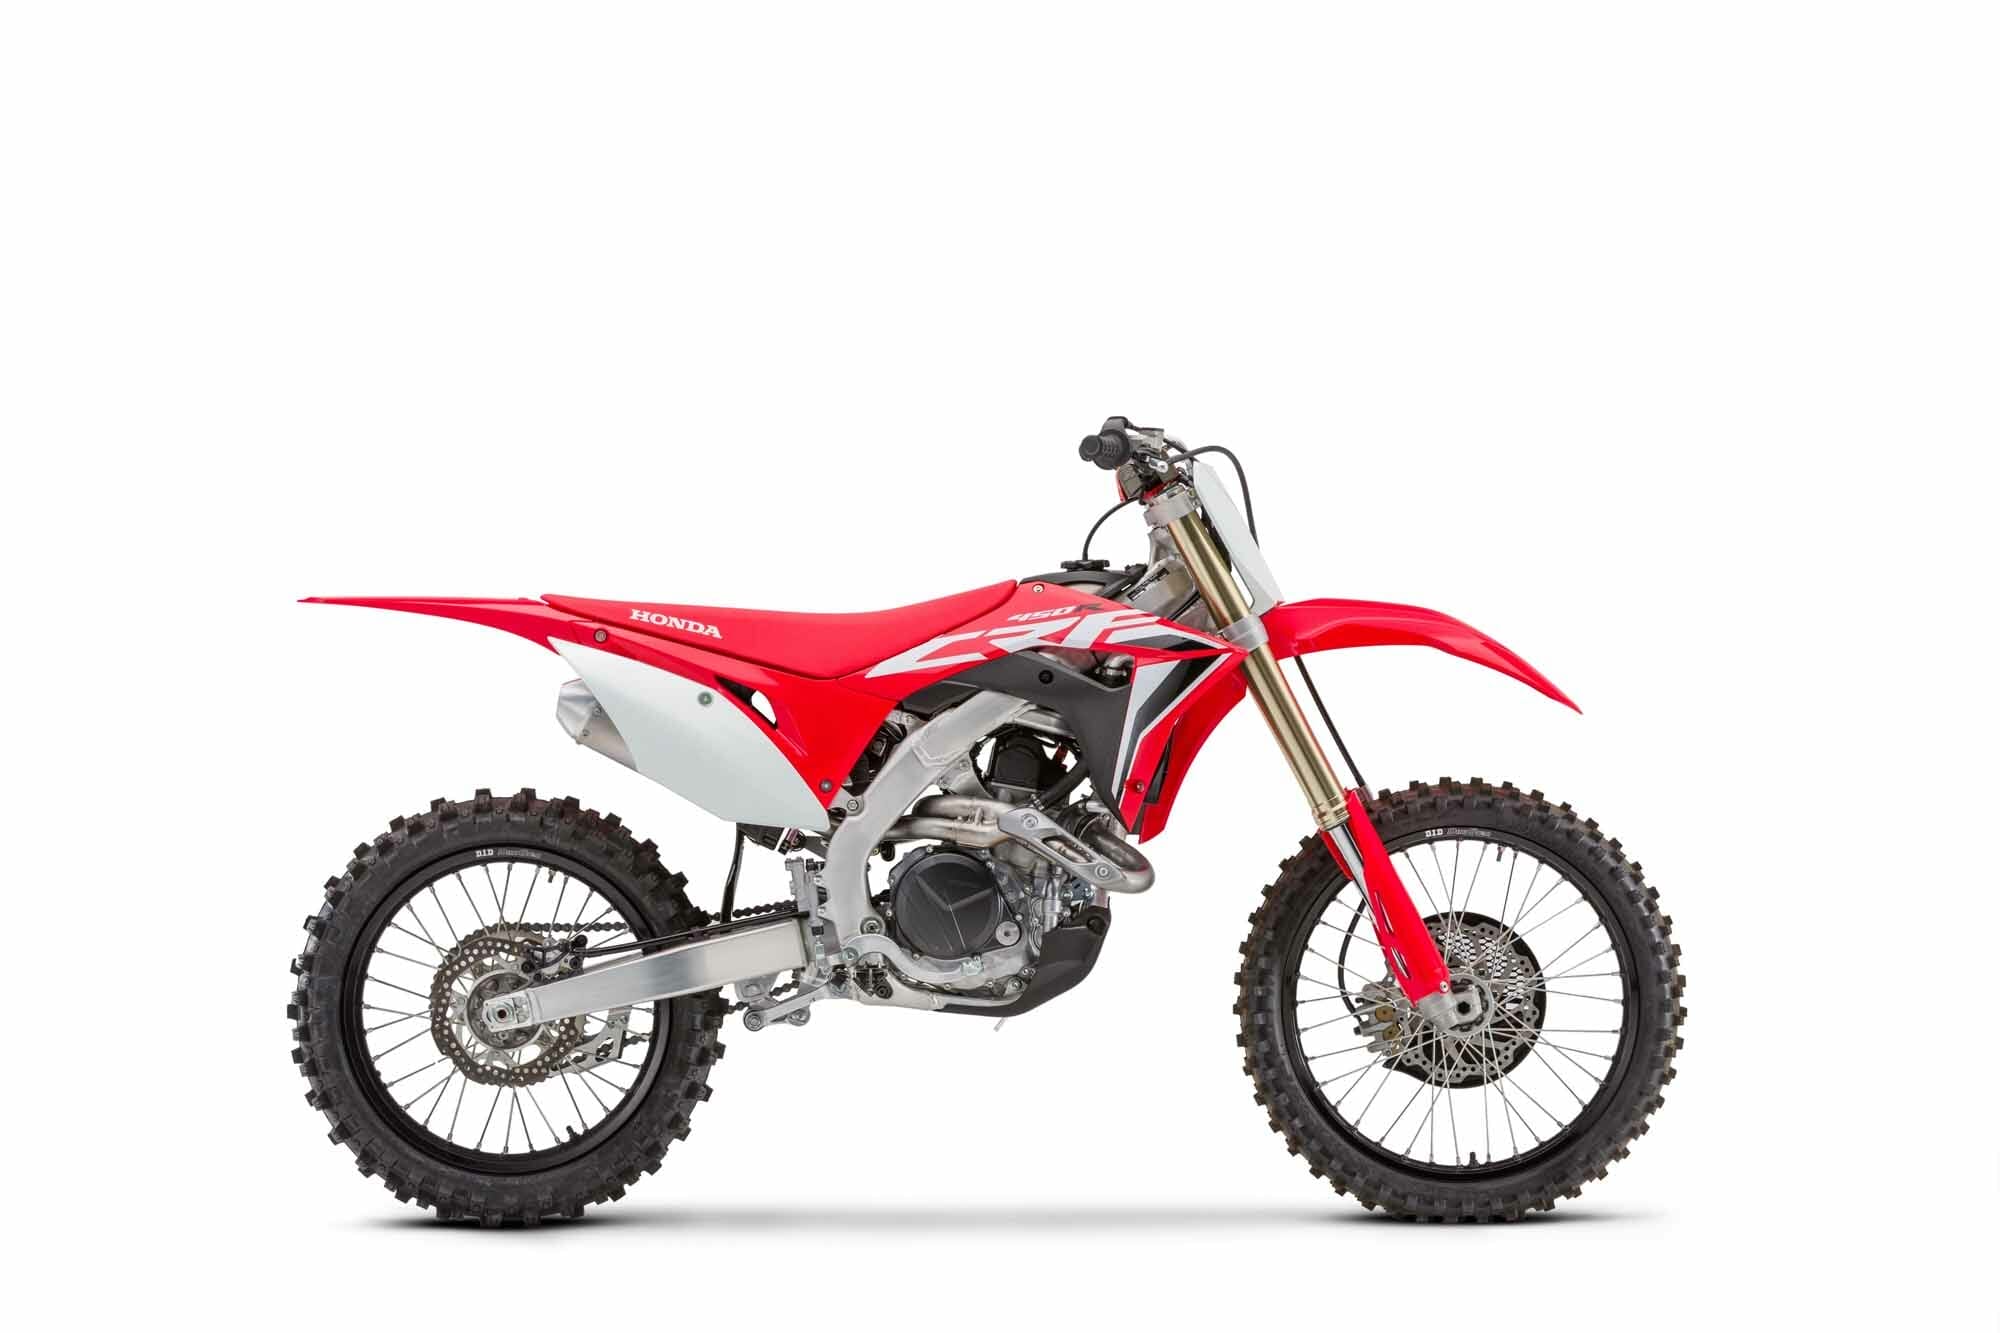 Recall Honda CRF450R
- also in the MOTORCYCLES.NEWS APP